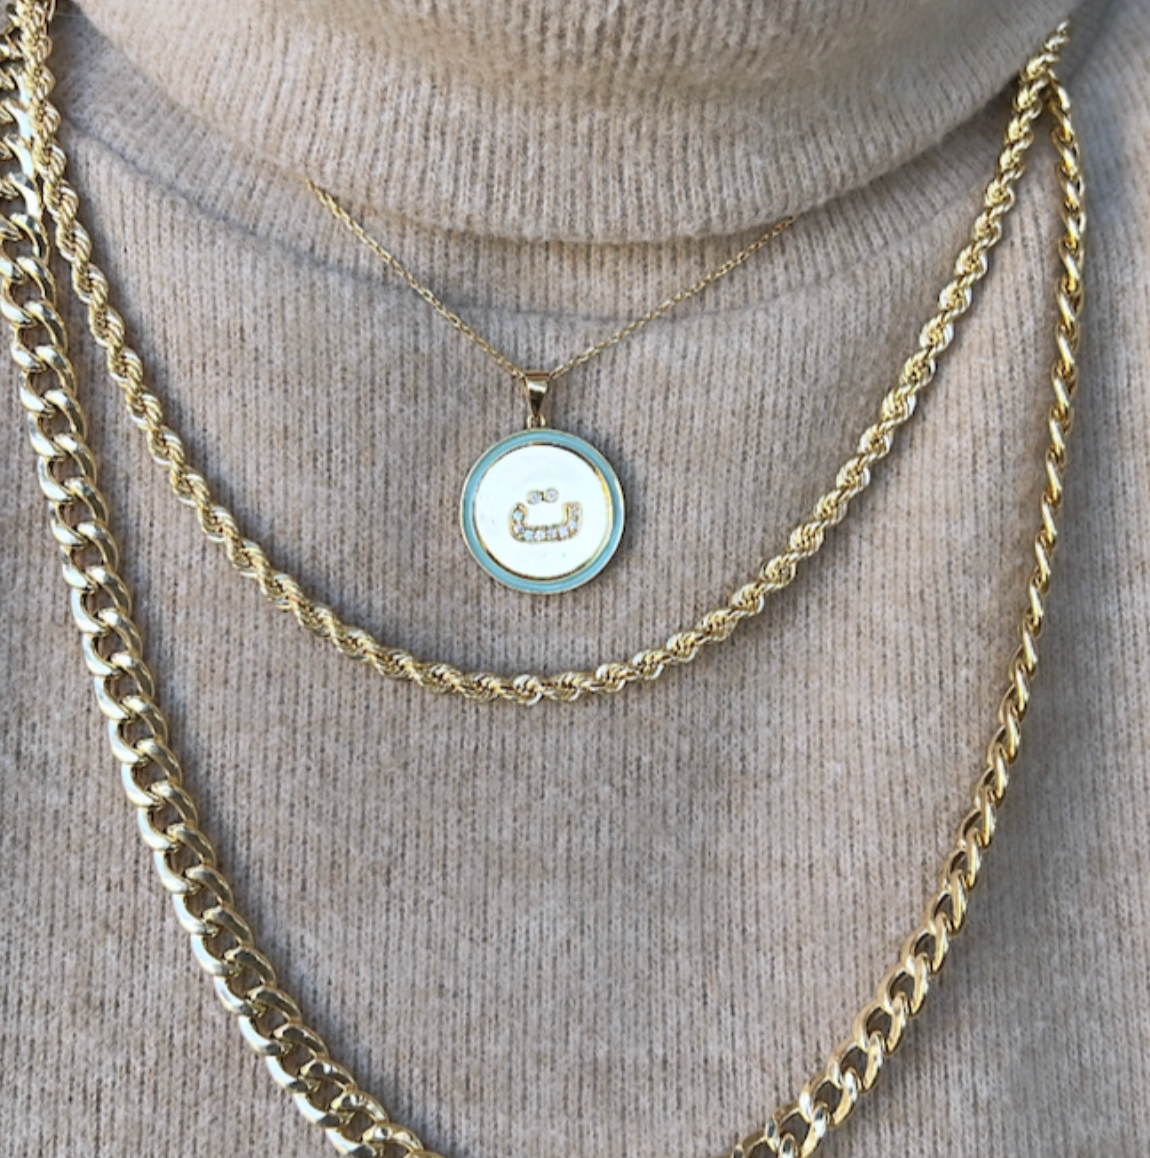 Customized Enamel Coin Necklace